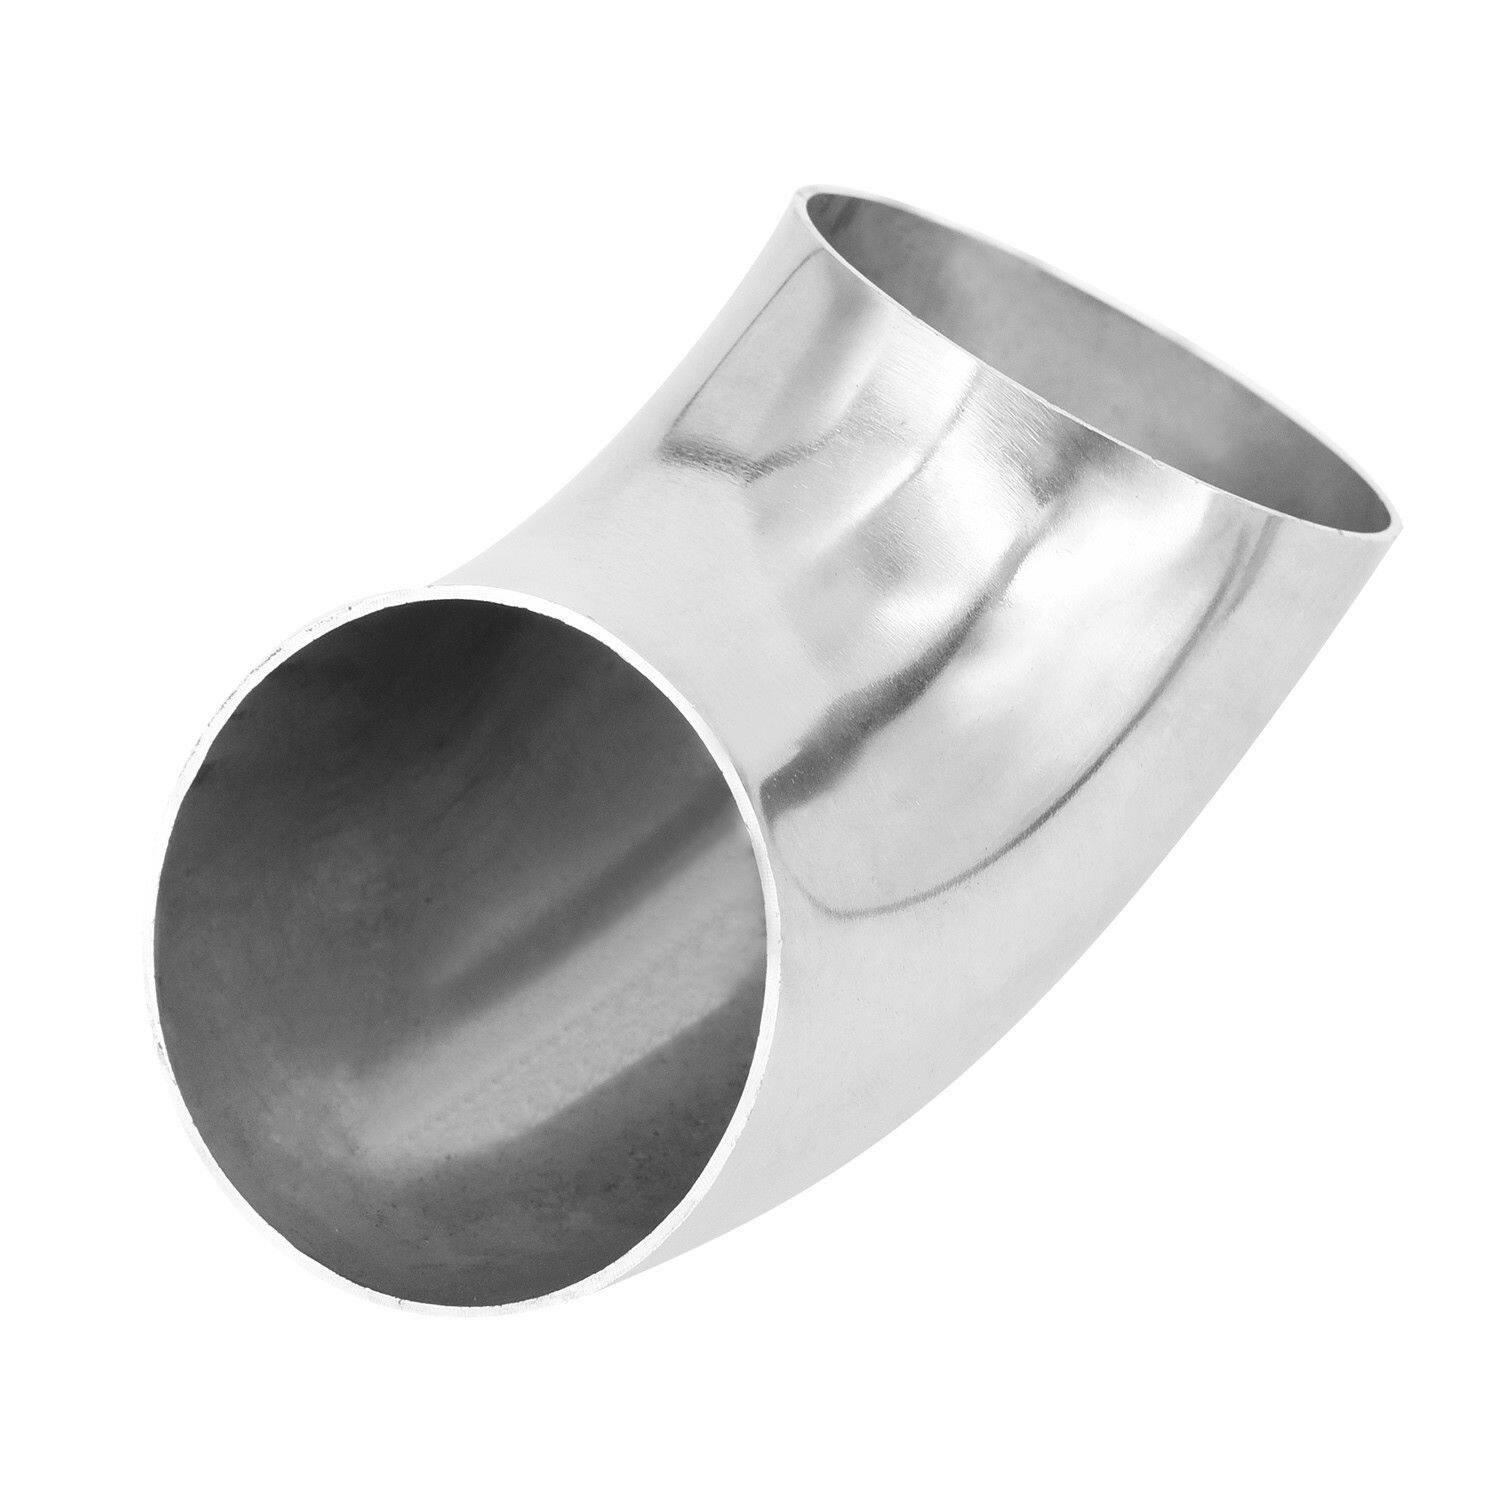 stainless steel elbow manufacturers, china stainless steel elbow